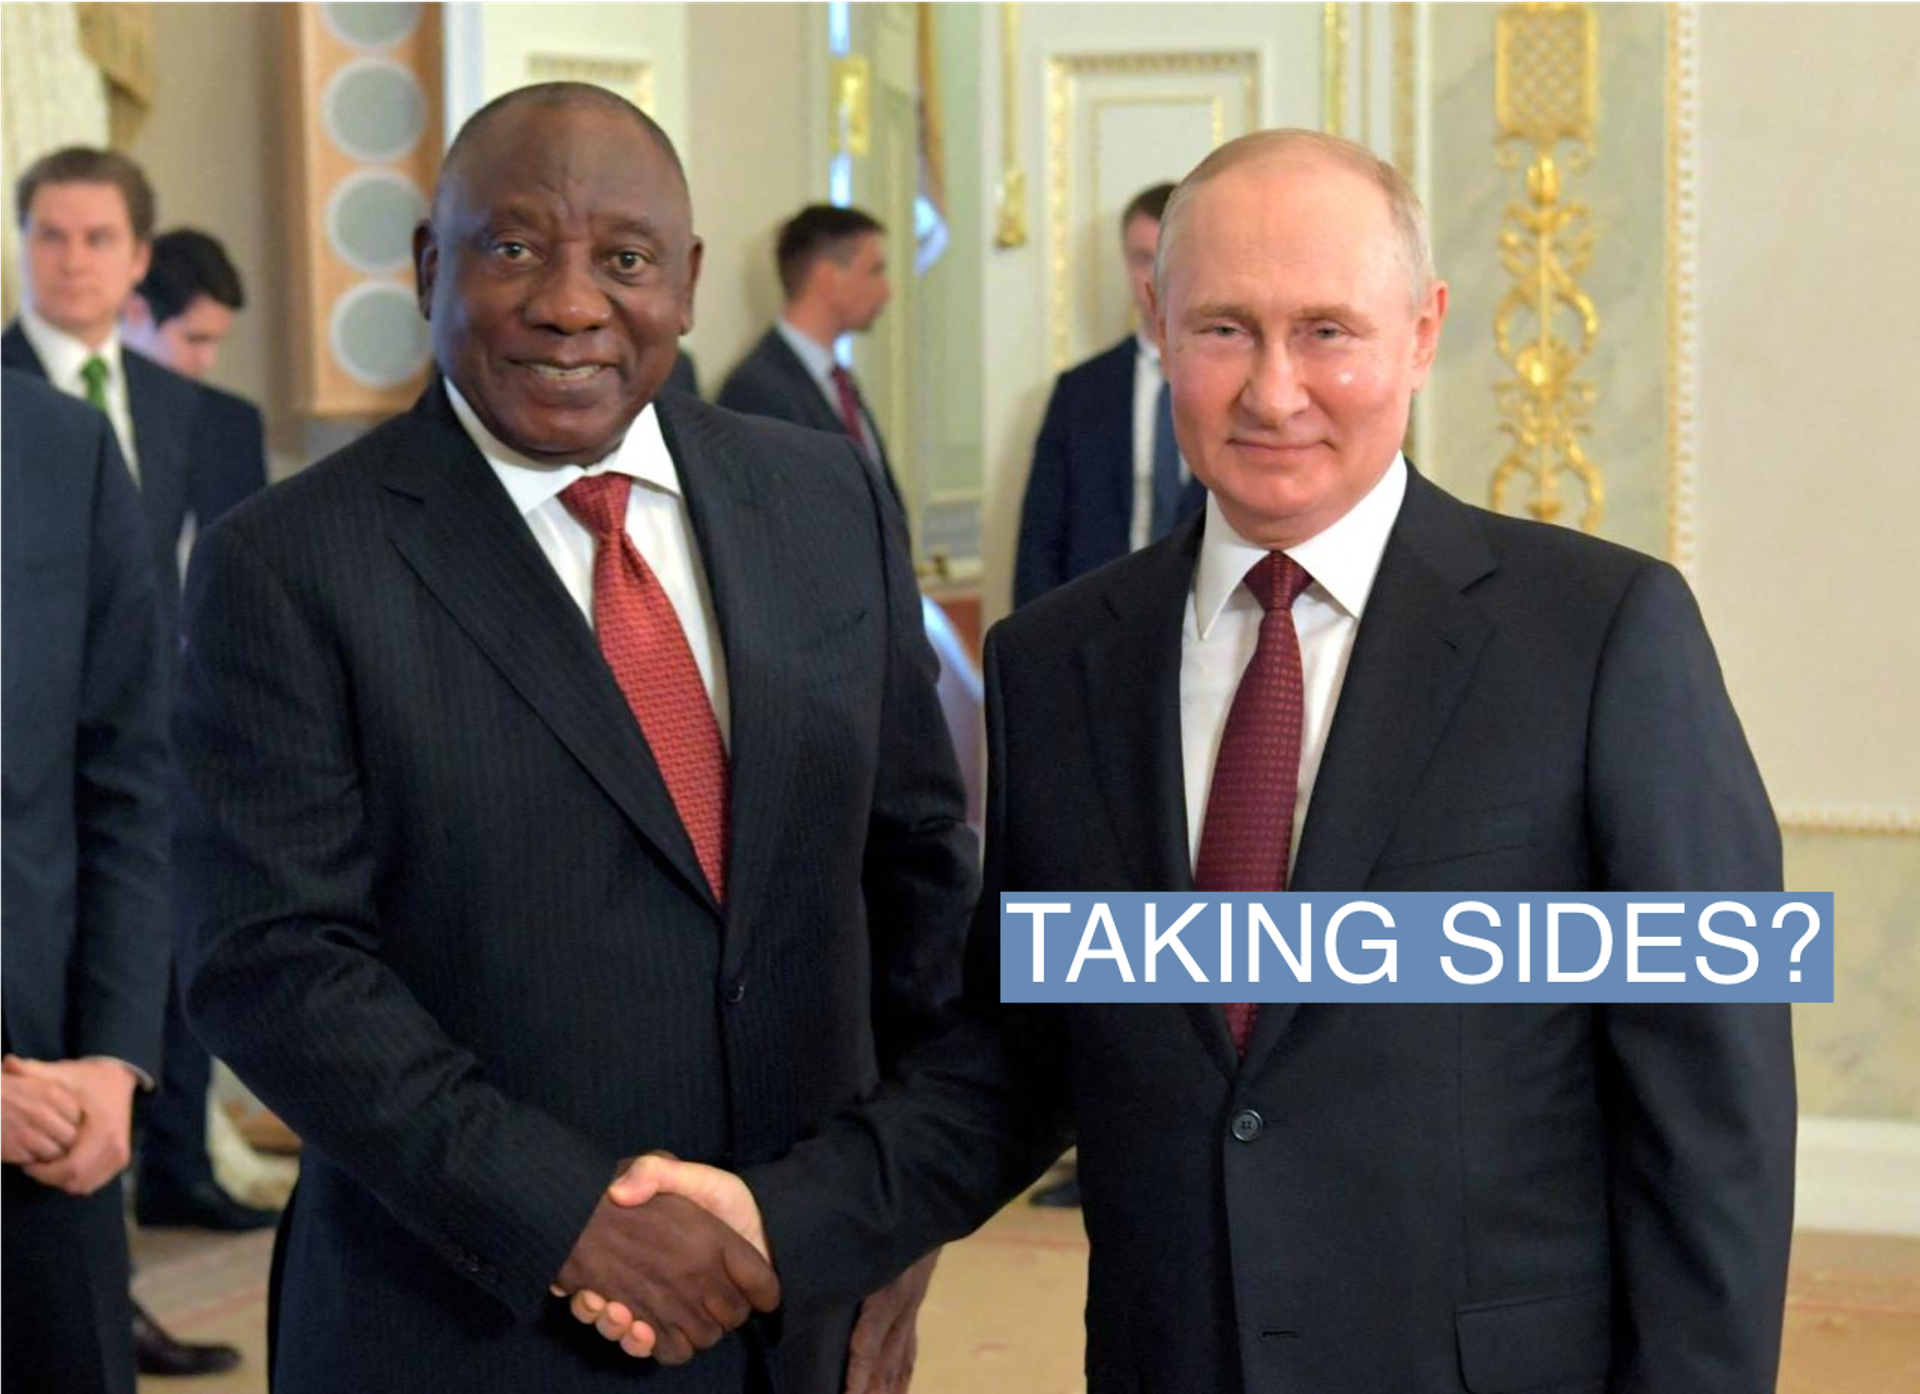 ssian President Vladimir Putin shakes hands with South African President Cyril Ramaphosa after a meeting with delegation of African leaders to discuss their proposal for peace talks between Russia and Ukraine, in Saint Petersburg, Russia June 17, 2023. Yevgeny Biyatov/Host photo agency RIA Novosti via REUTERS